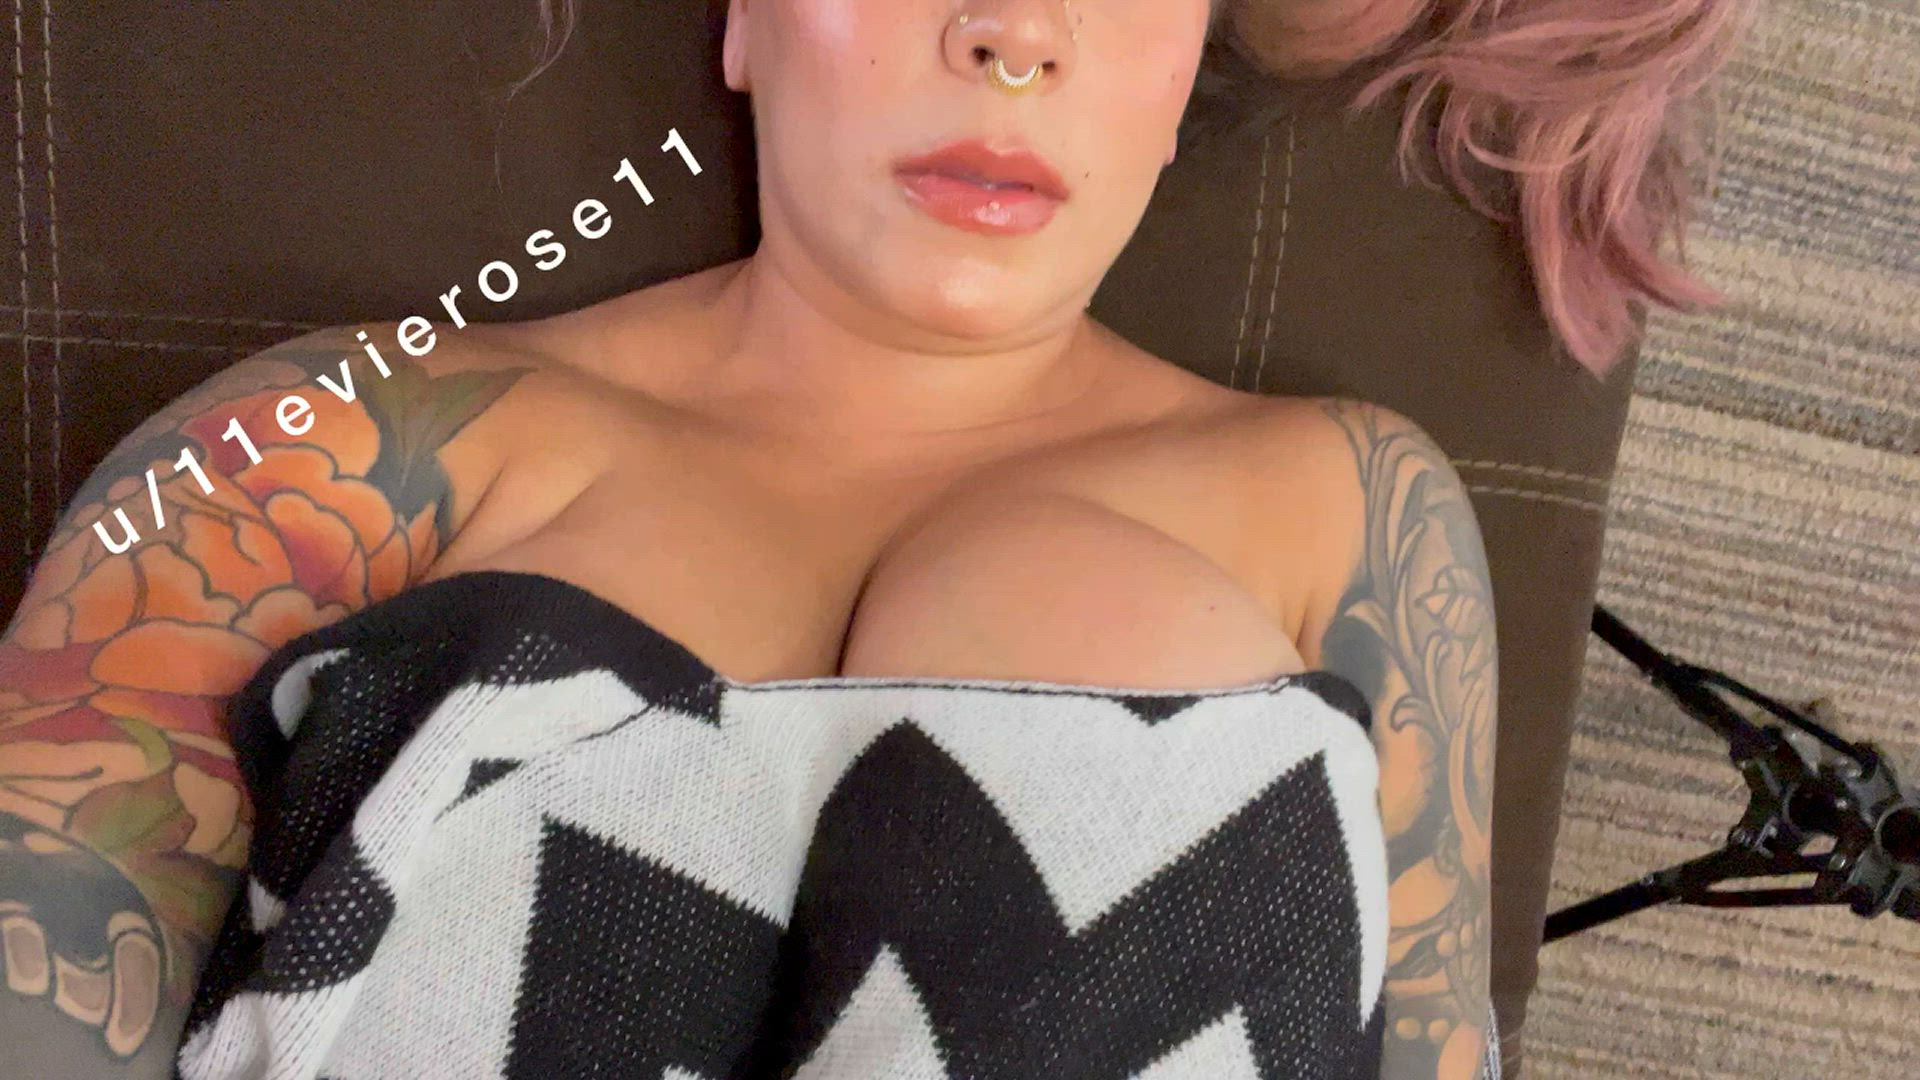 Big Tits porn video with onlyfans model Evie Rose <strong>@xevierosex</strong>